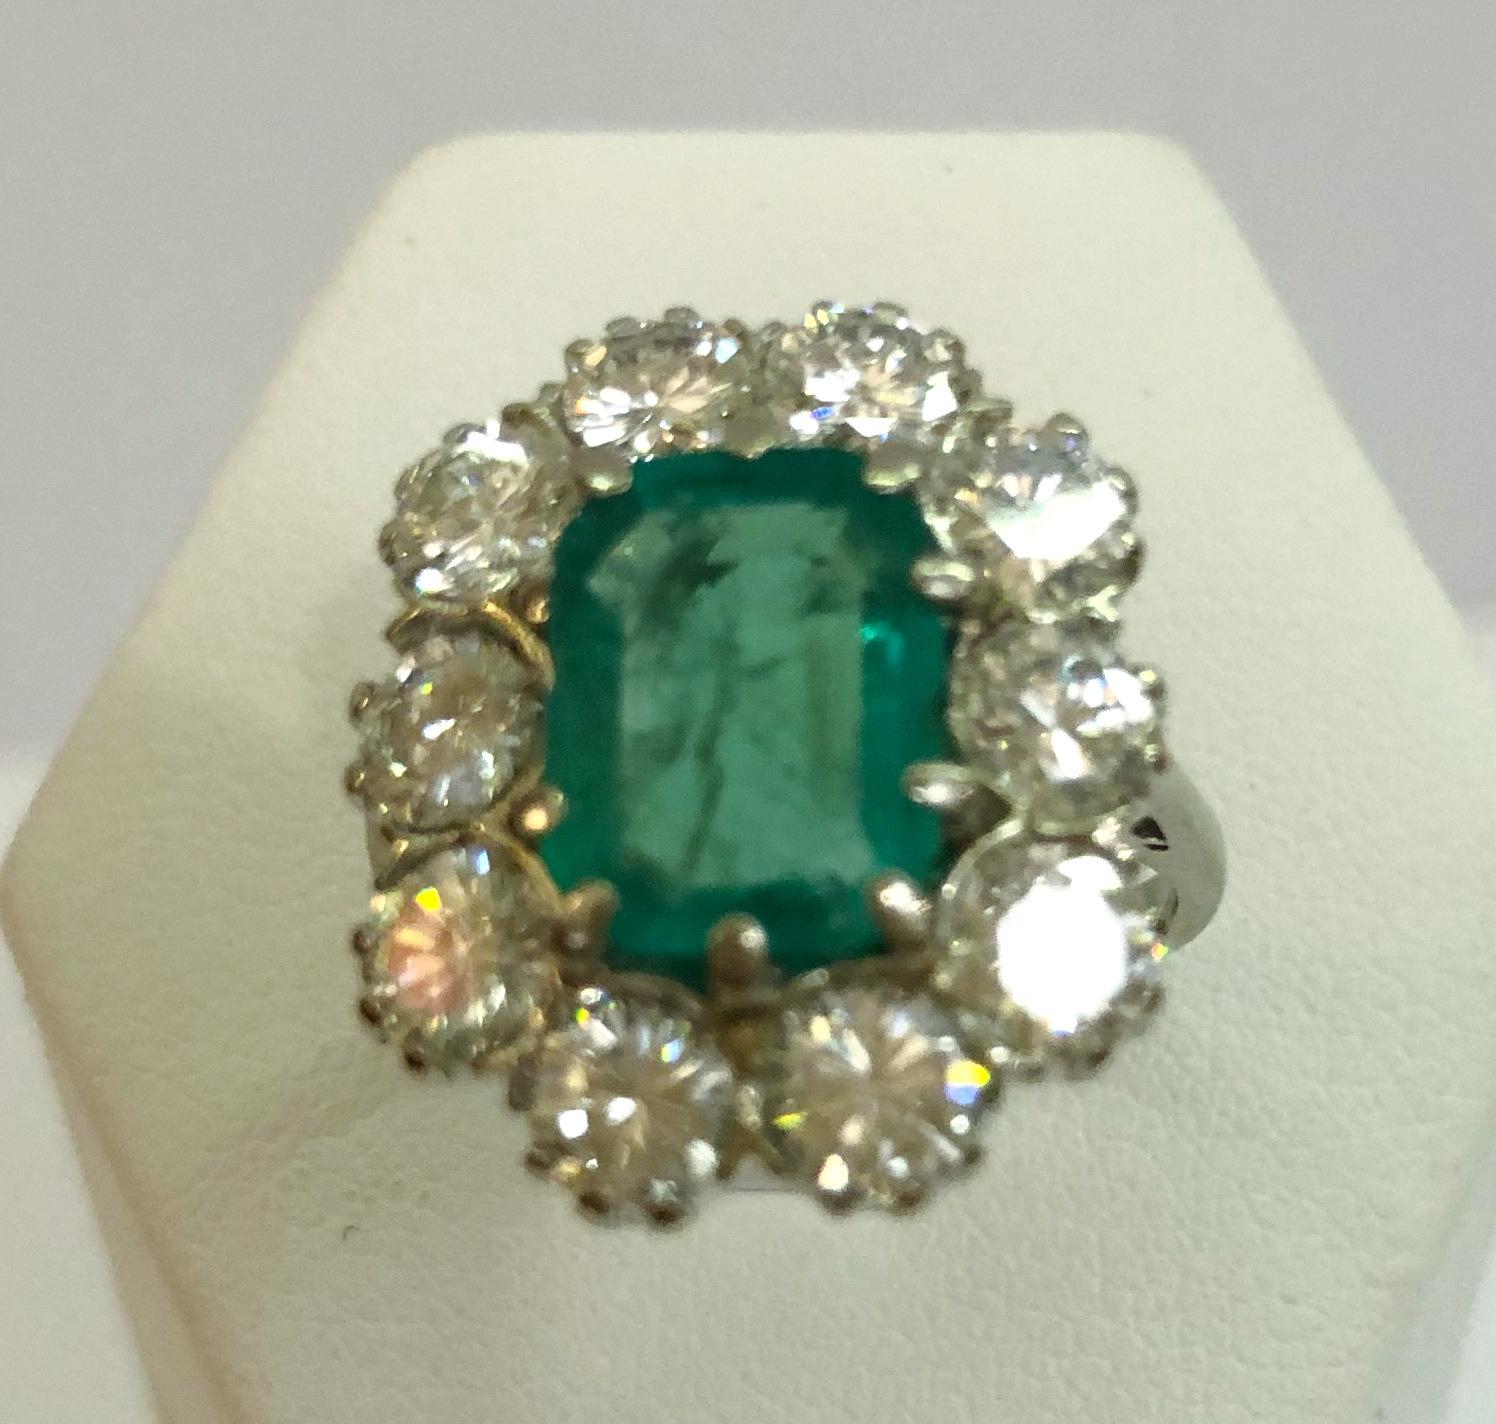 18 karat white gold ring with a large octagonal emerald of 2.3 karats and brilliant diamonds for a total of 2.7 karats, Italy 1960-1970s
Ring size US 7.5